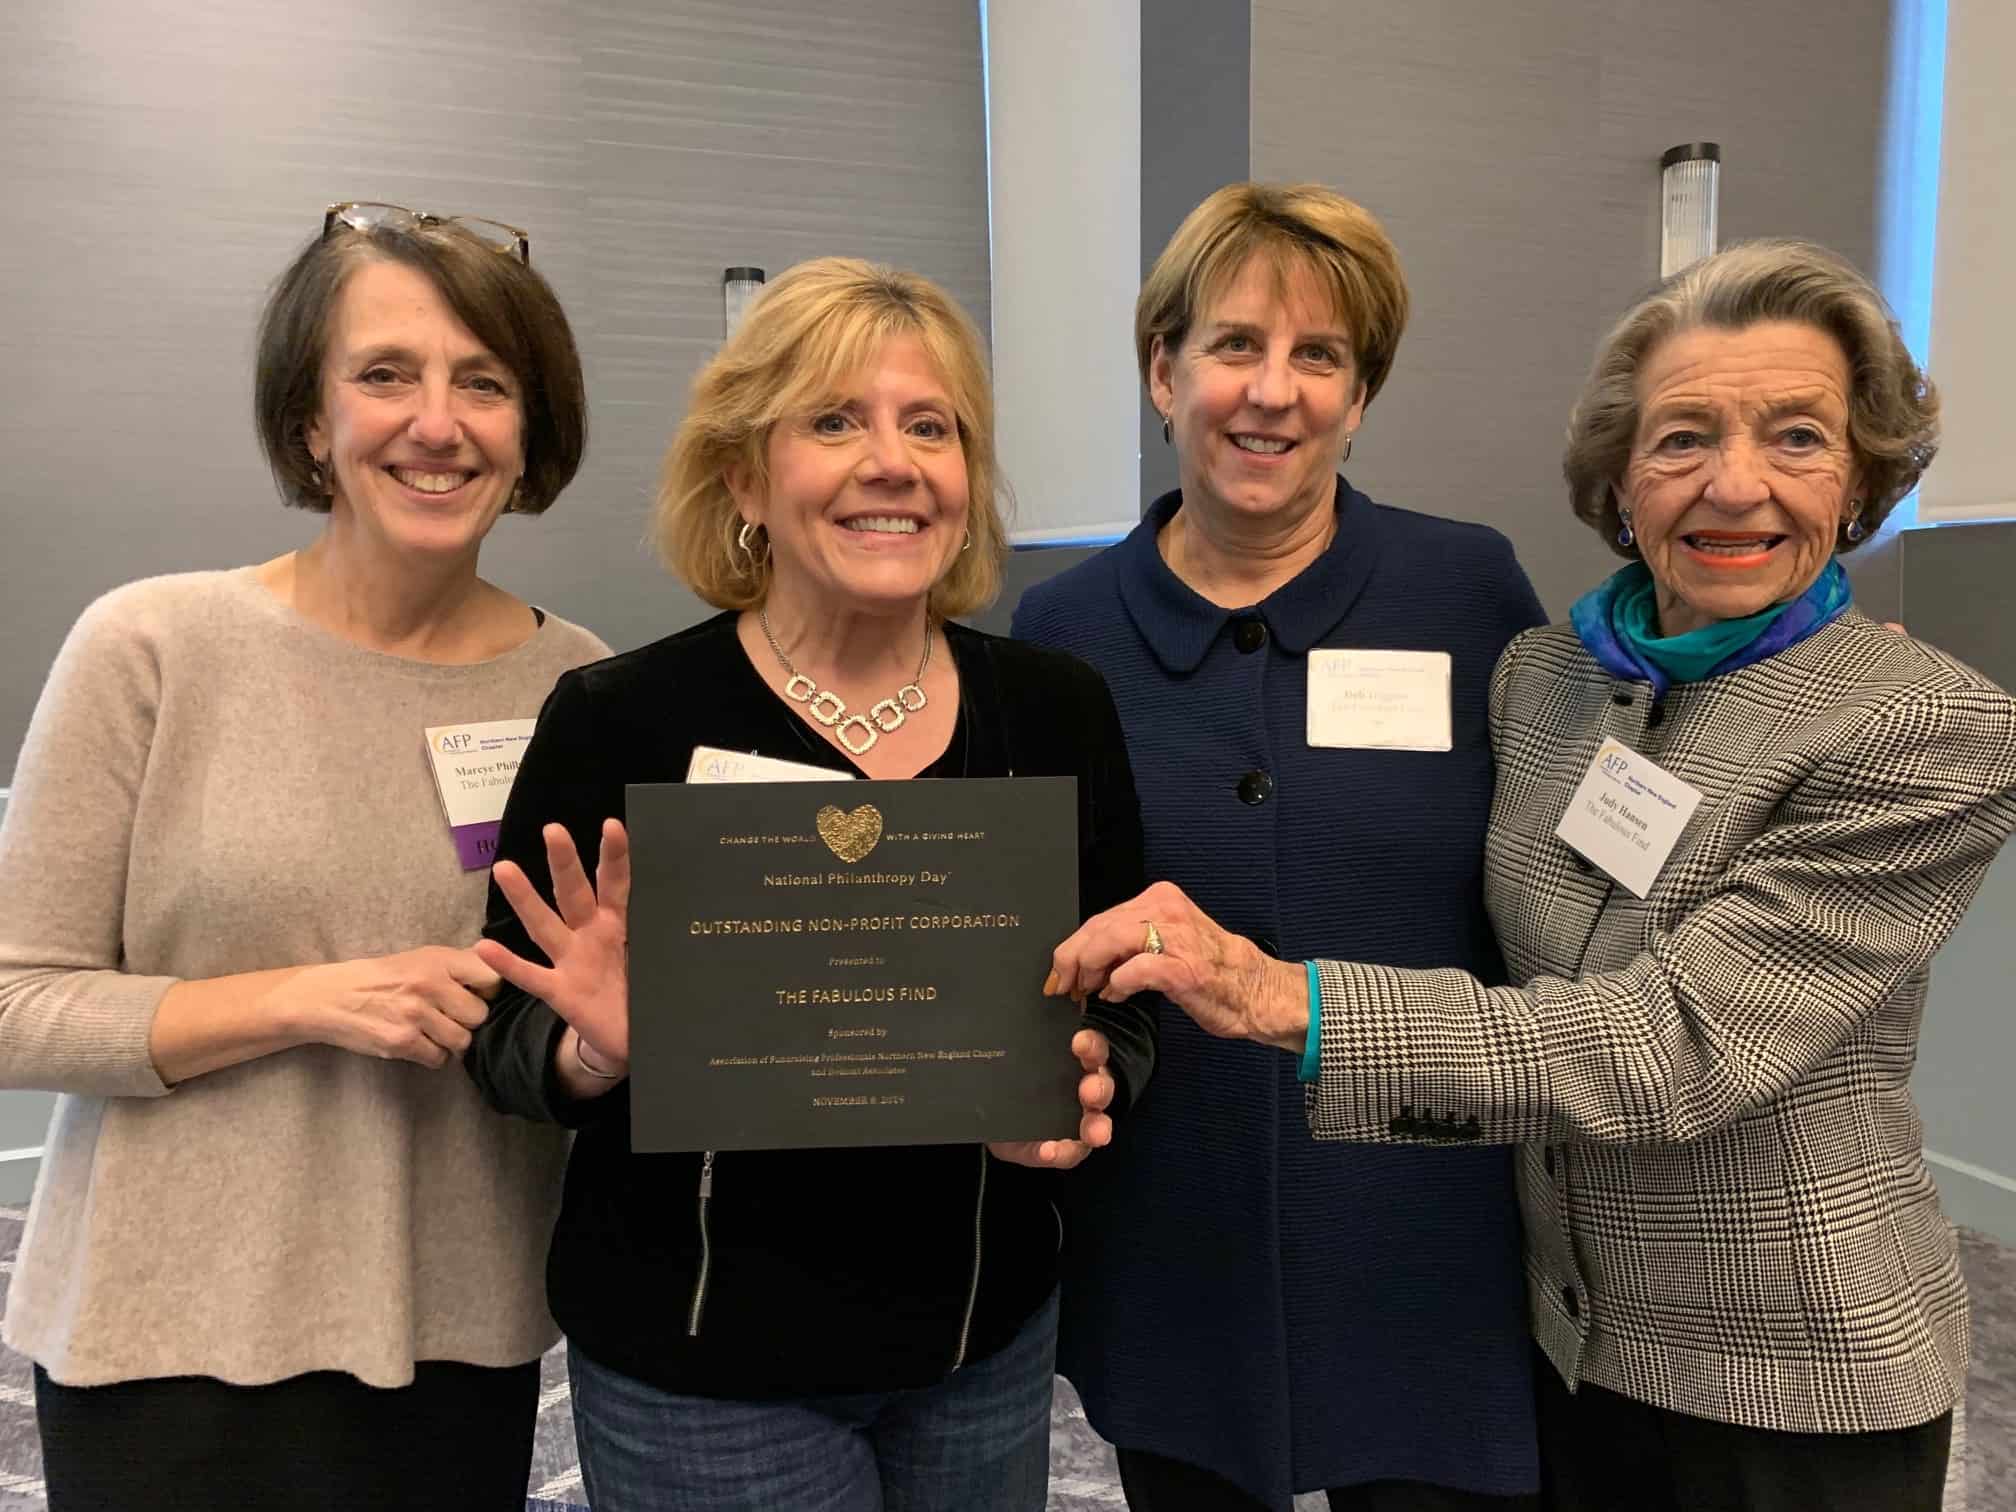 (l to r) Board Members Marcye Philbrook, President; Anne Hunter, Vice President and Store Manager; Deb Higgins, Treasurer; and Judy Hansen from The Fabulous Find accept their award.